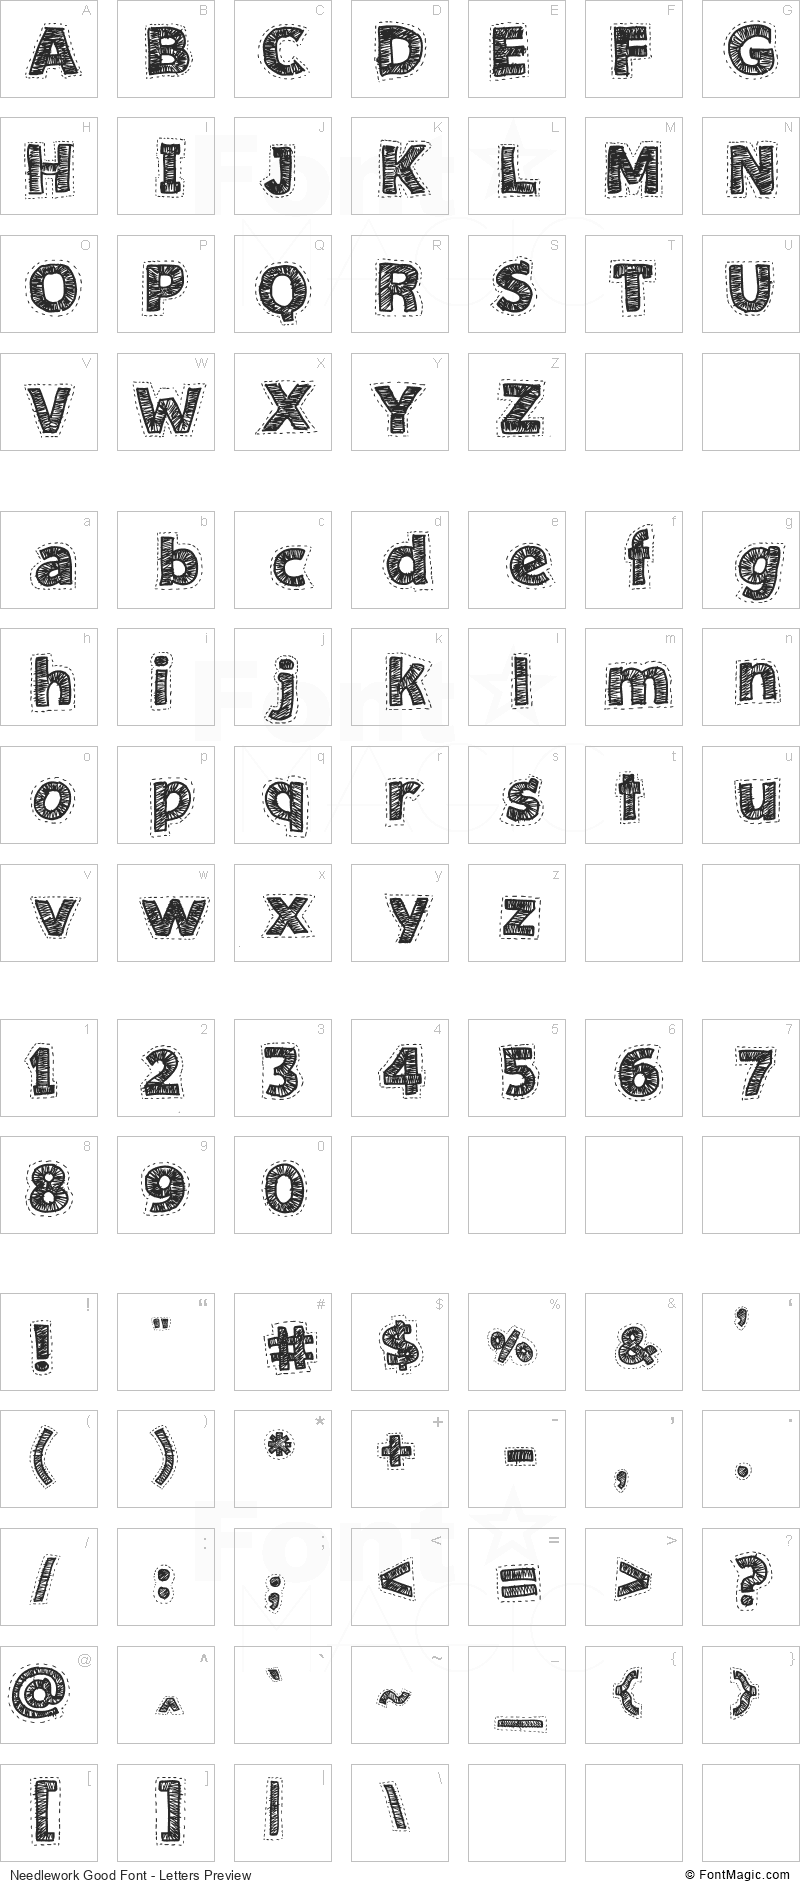 Needlework Good Font - All Latters Preview Chart